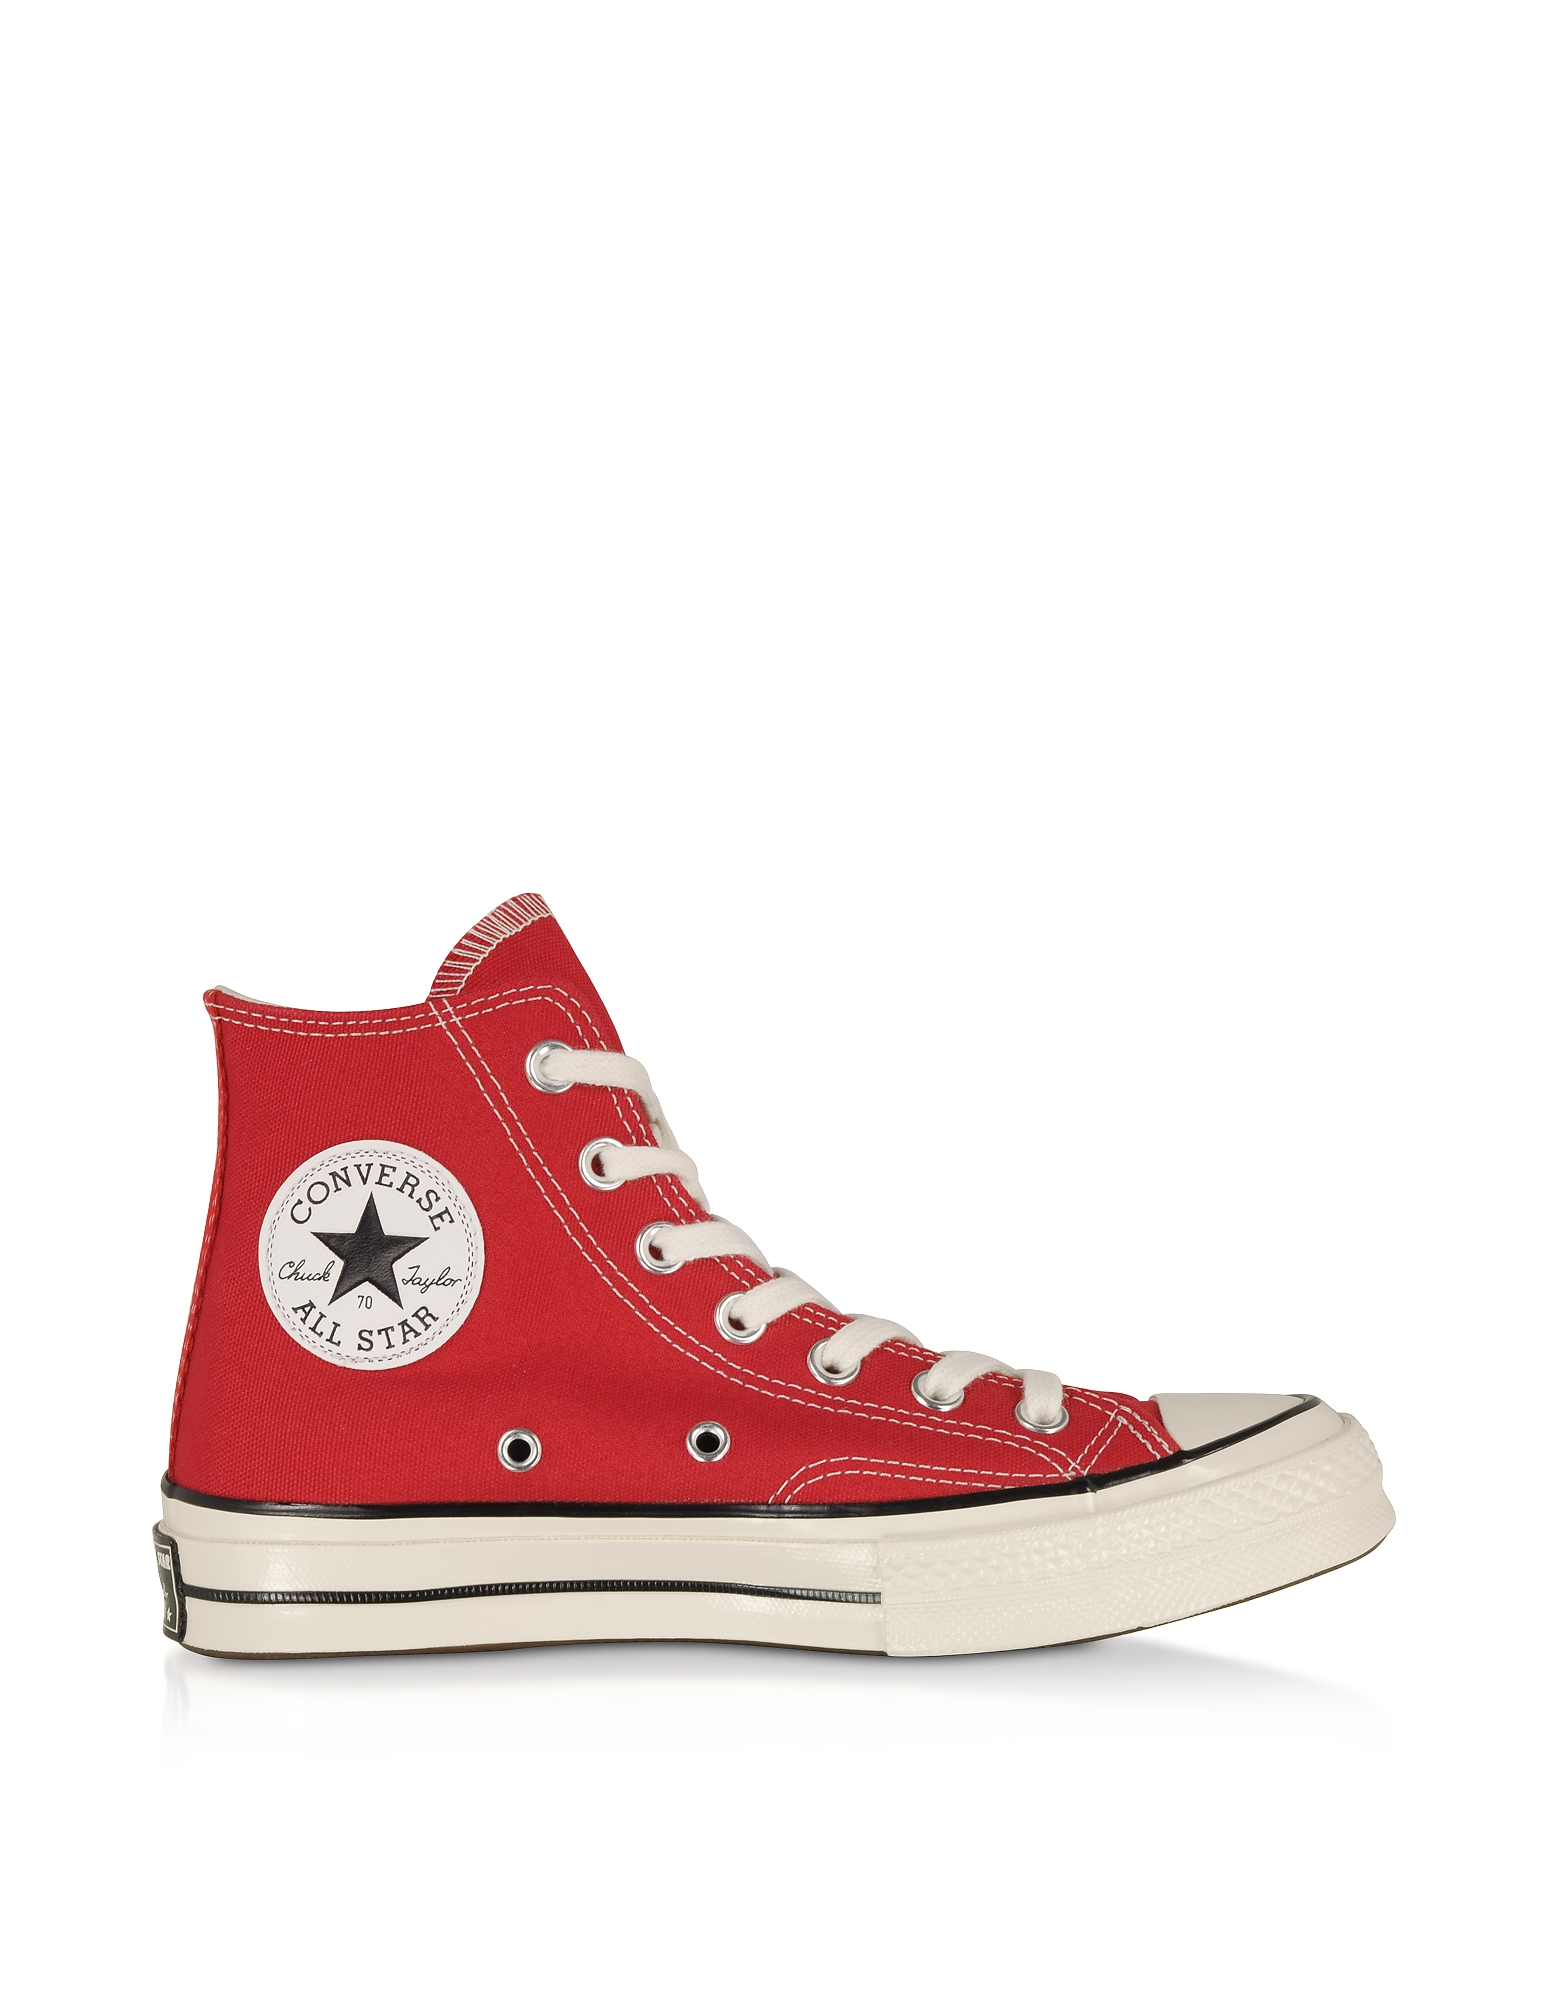 Converse Limited Edition Designer Shoes, Red Chuck 70 w/ Vintage Canvas High Top